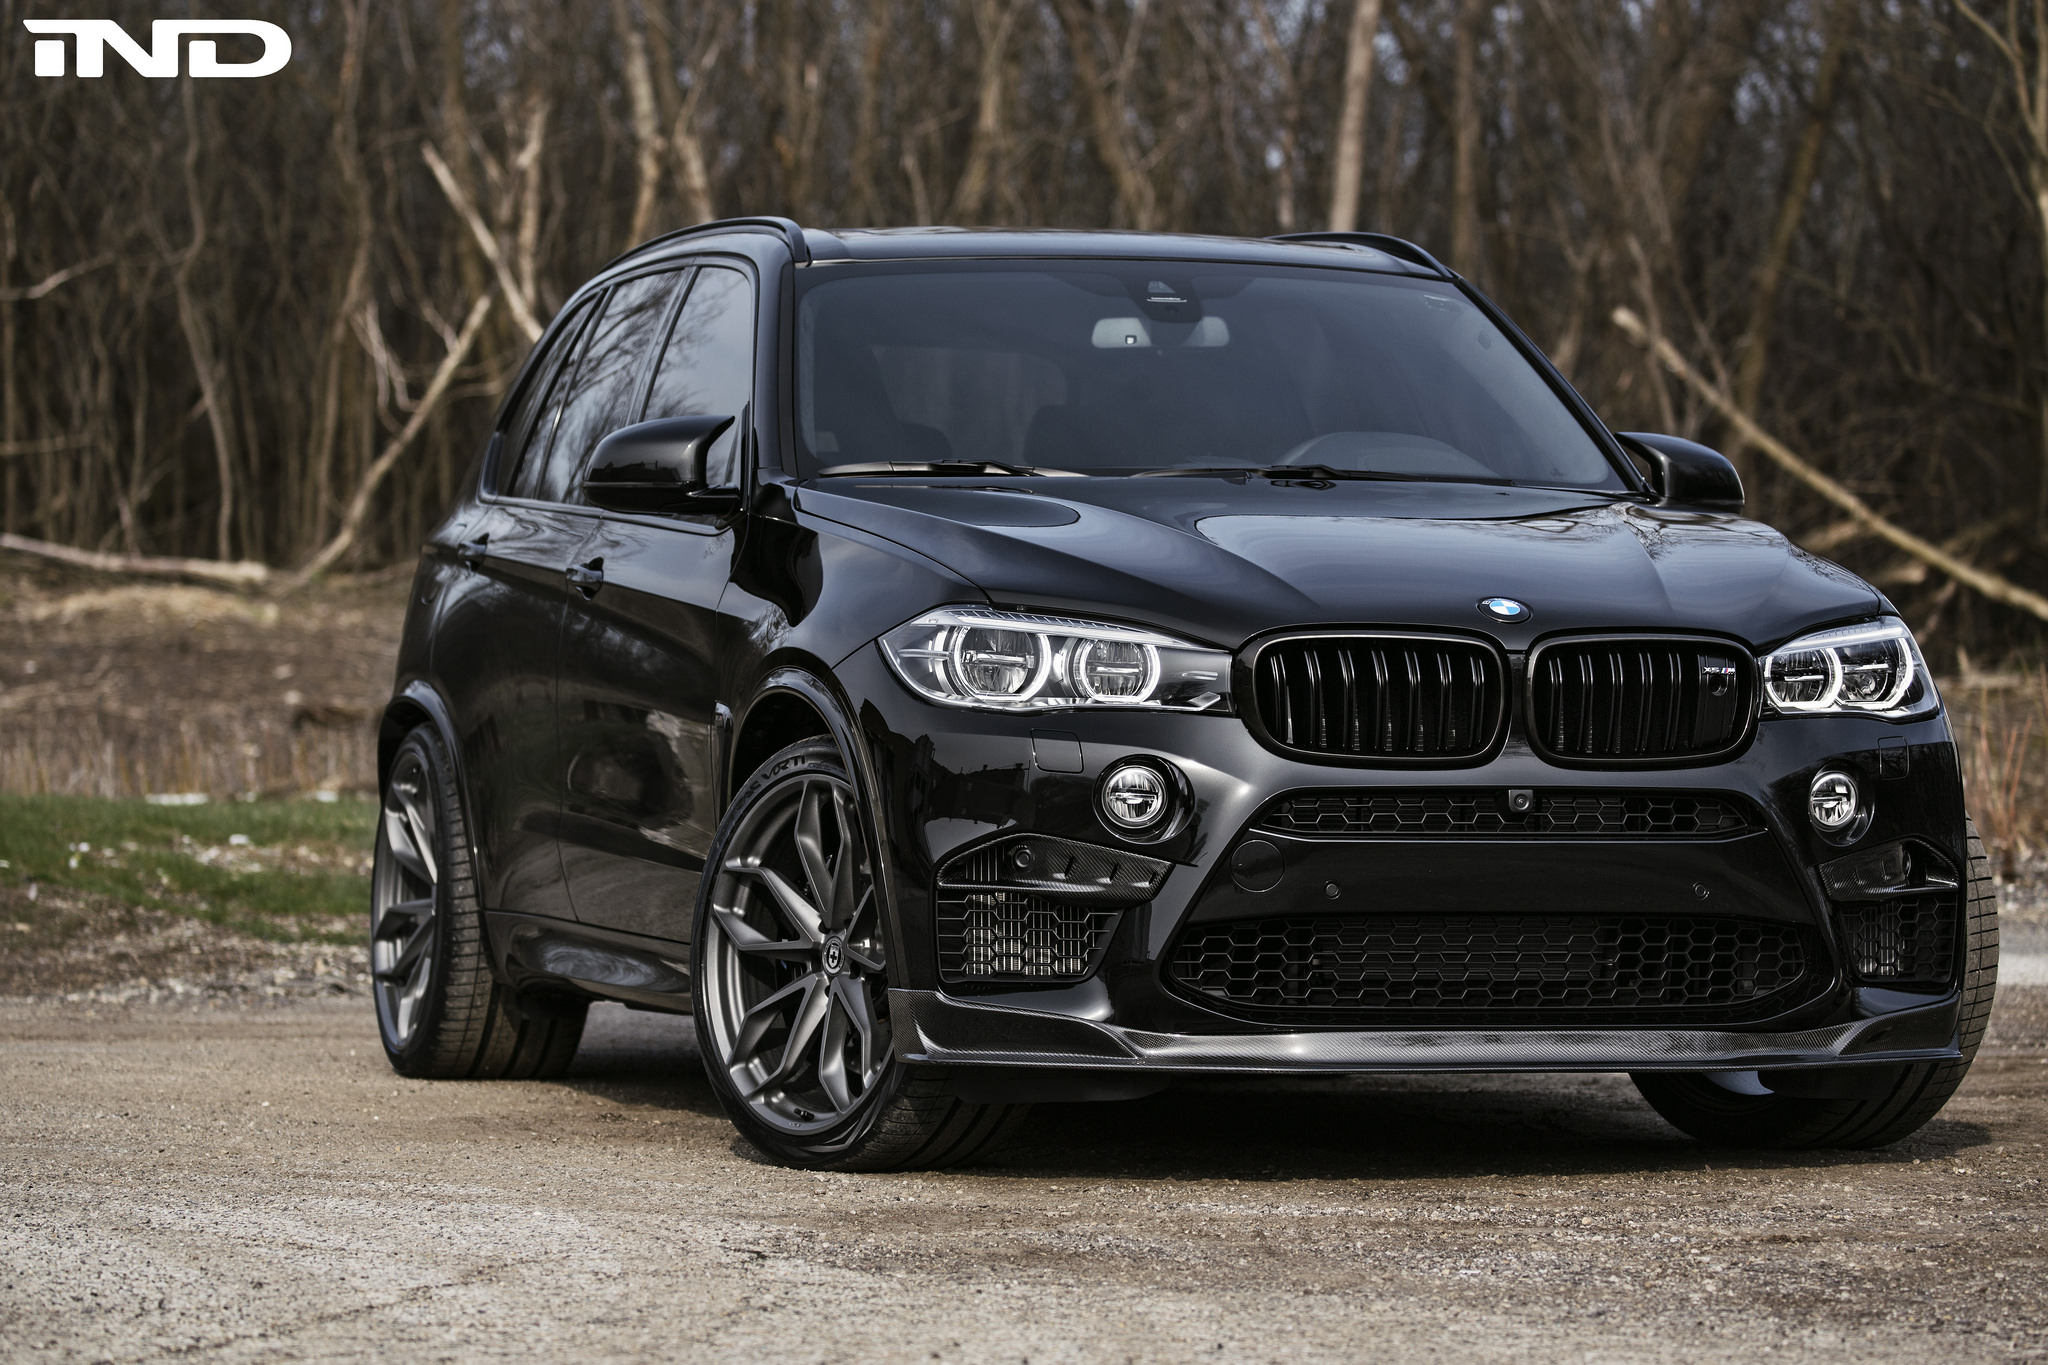 A Menacing Clean BMW X5 M Build By iND Distribution Image 1